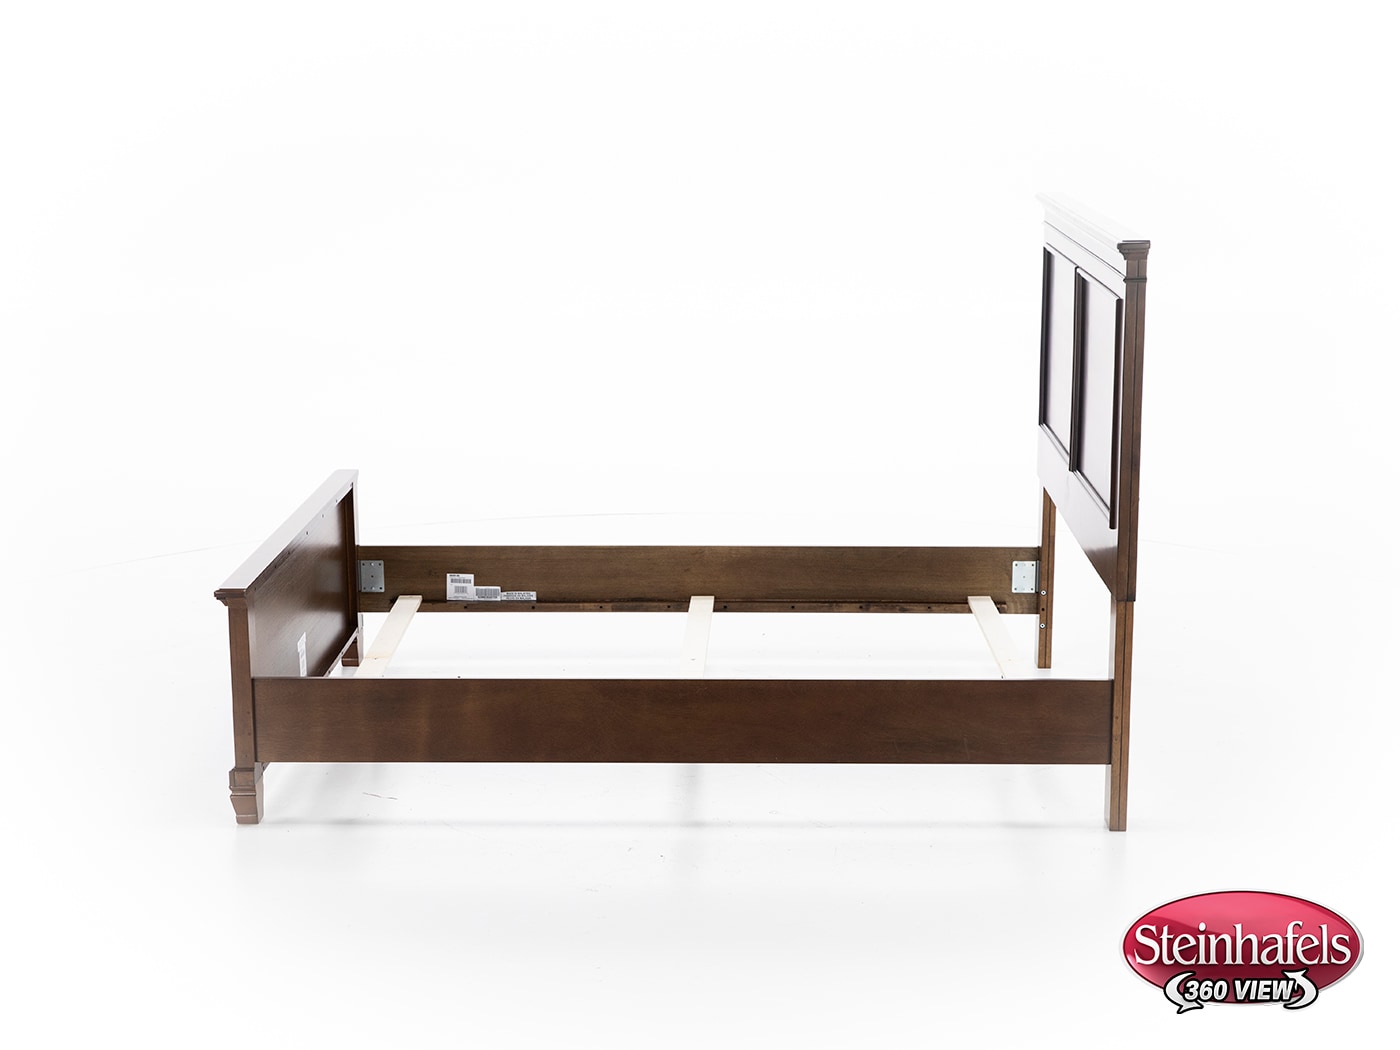 ashy painted twin bed package  image tpk  